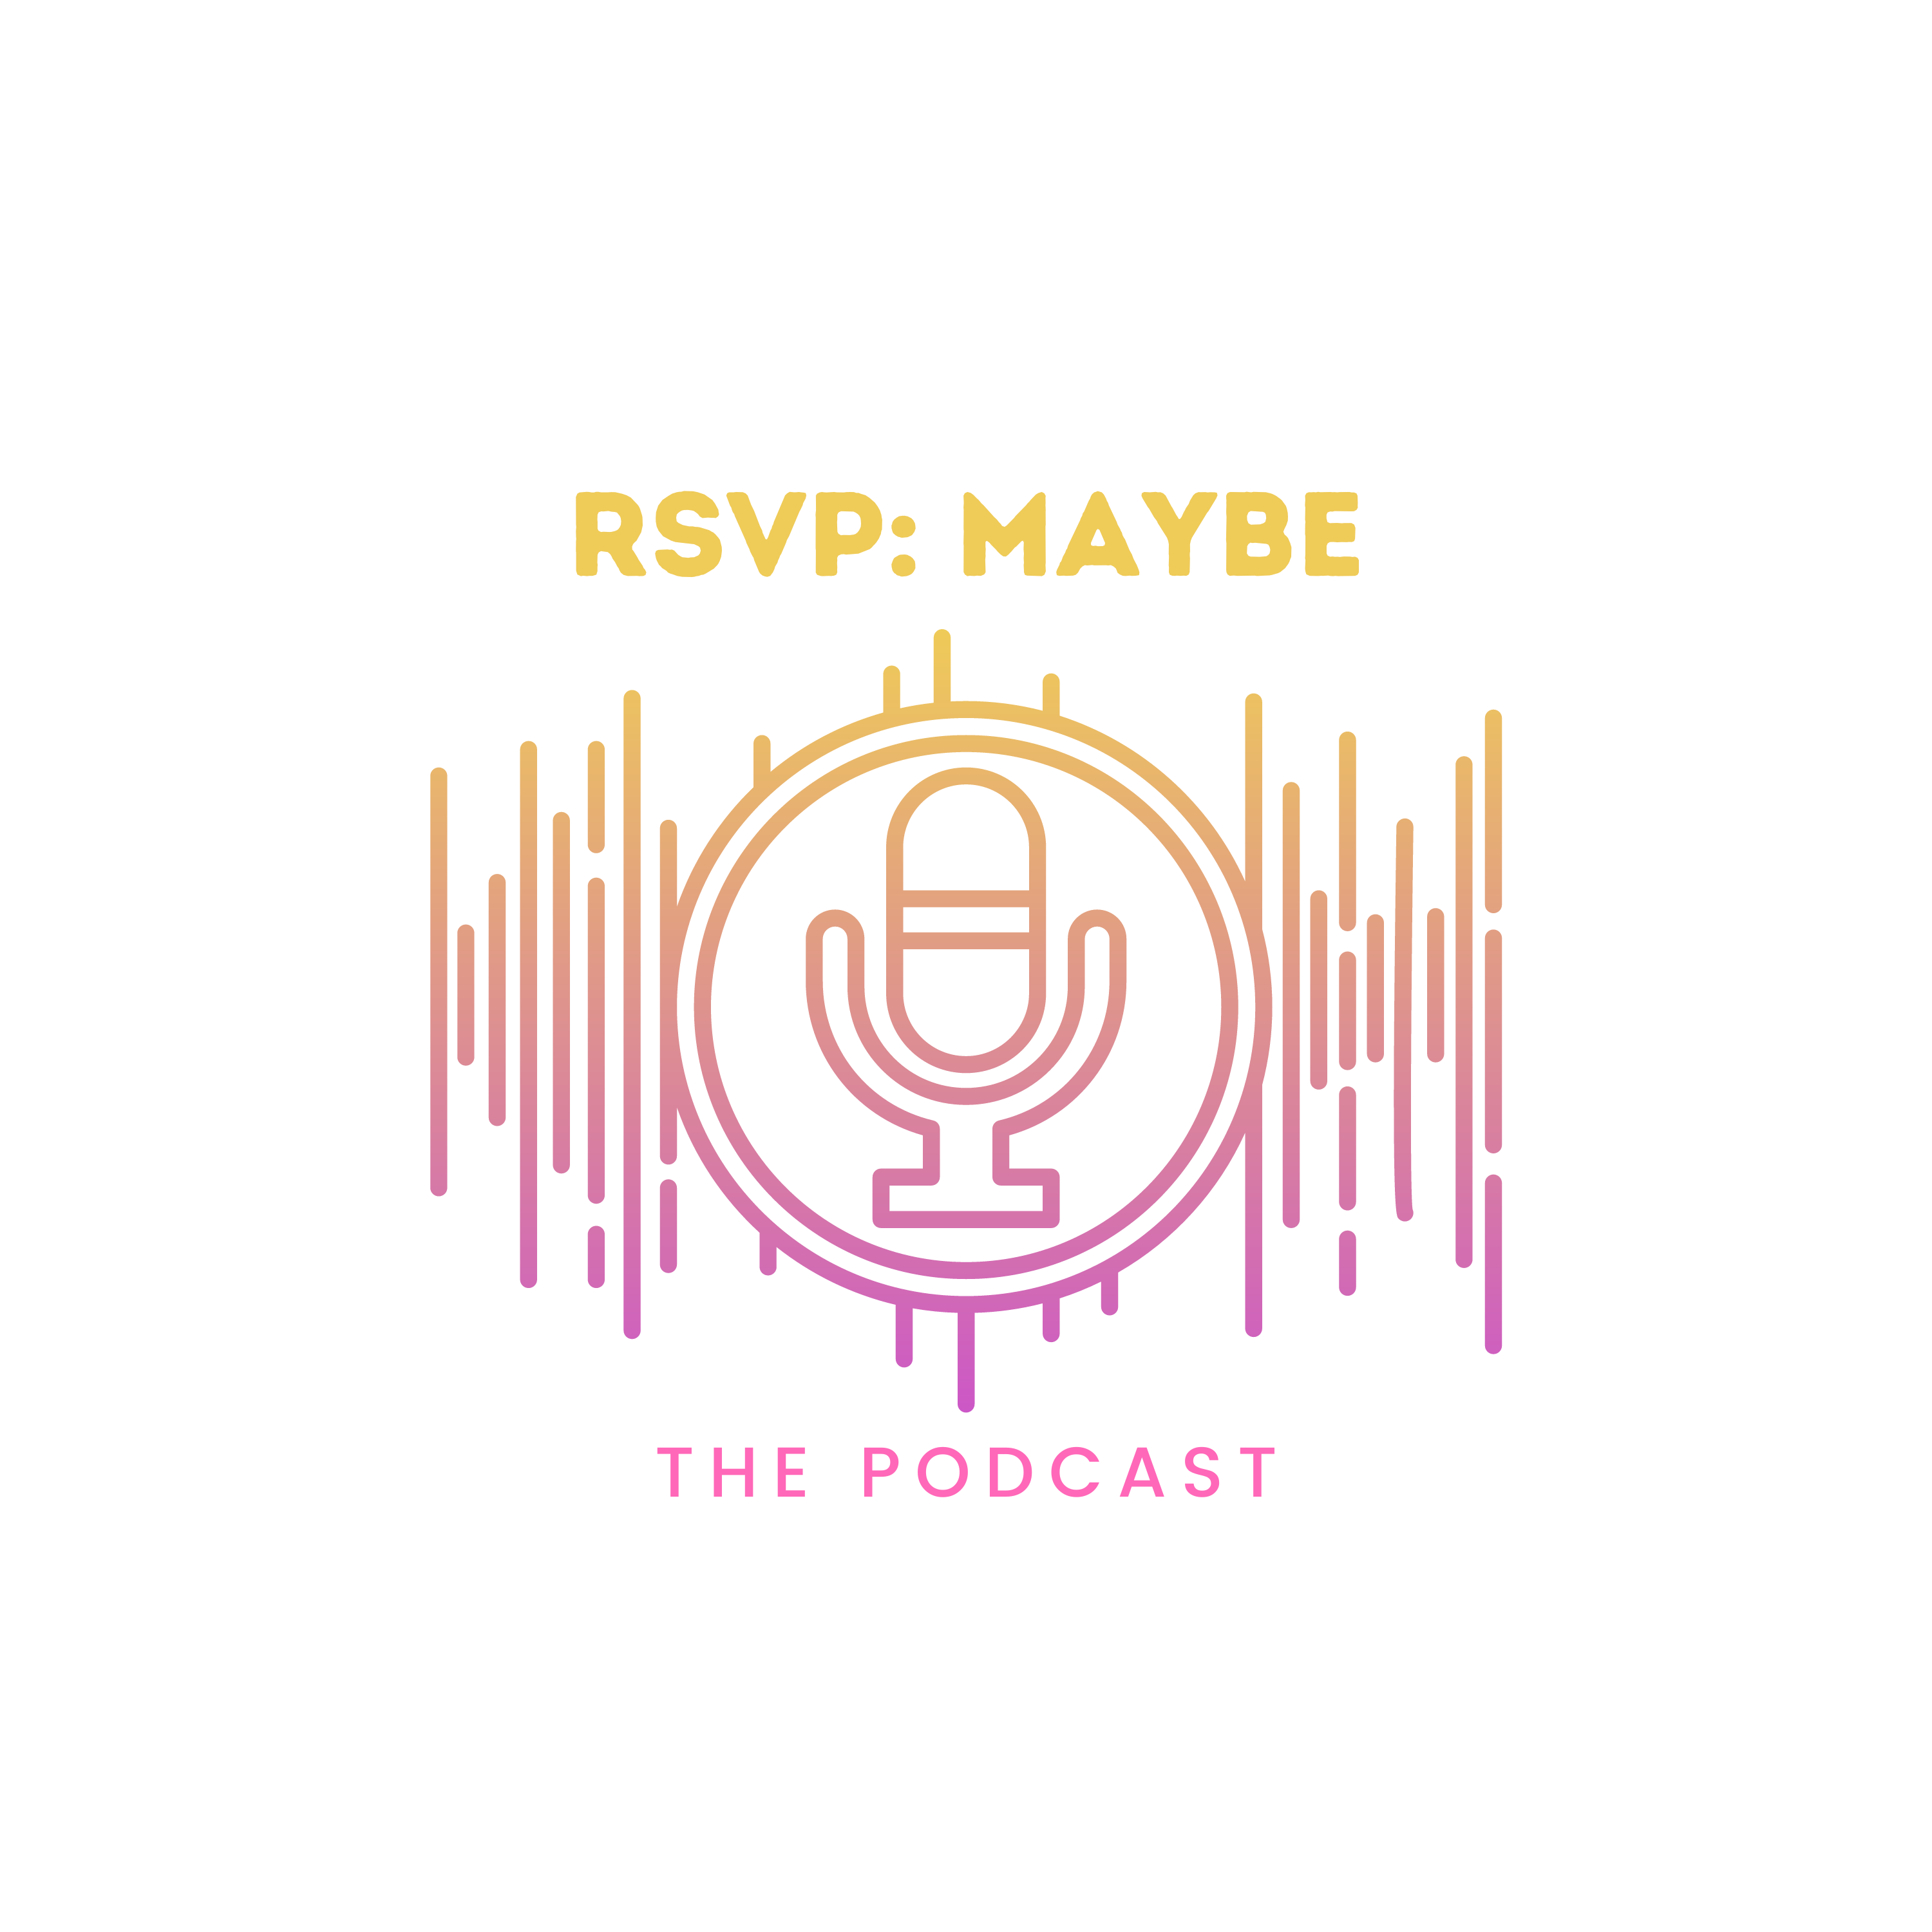 RSVP: MAYBE  THE PODCAST